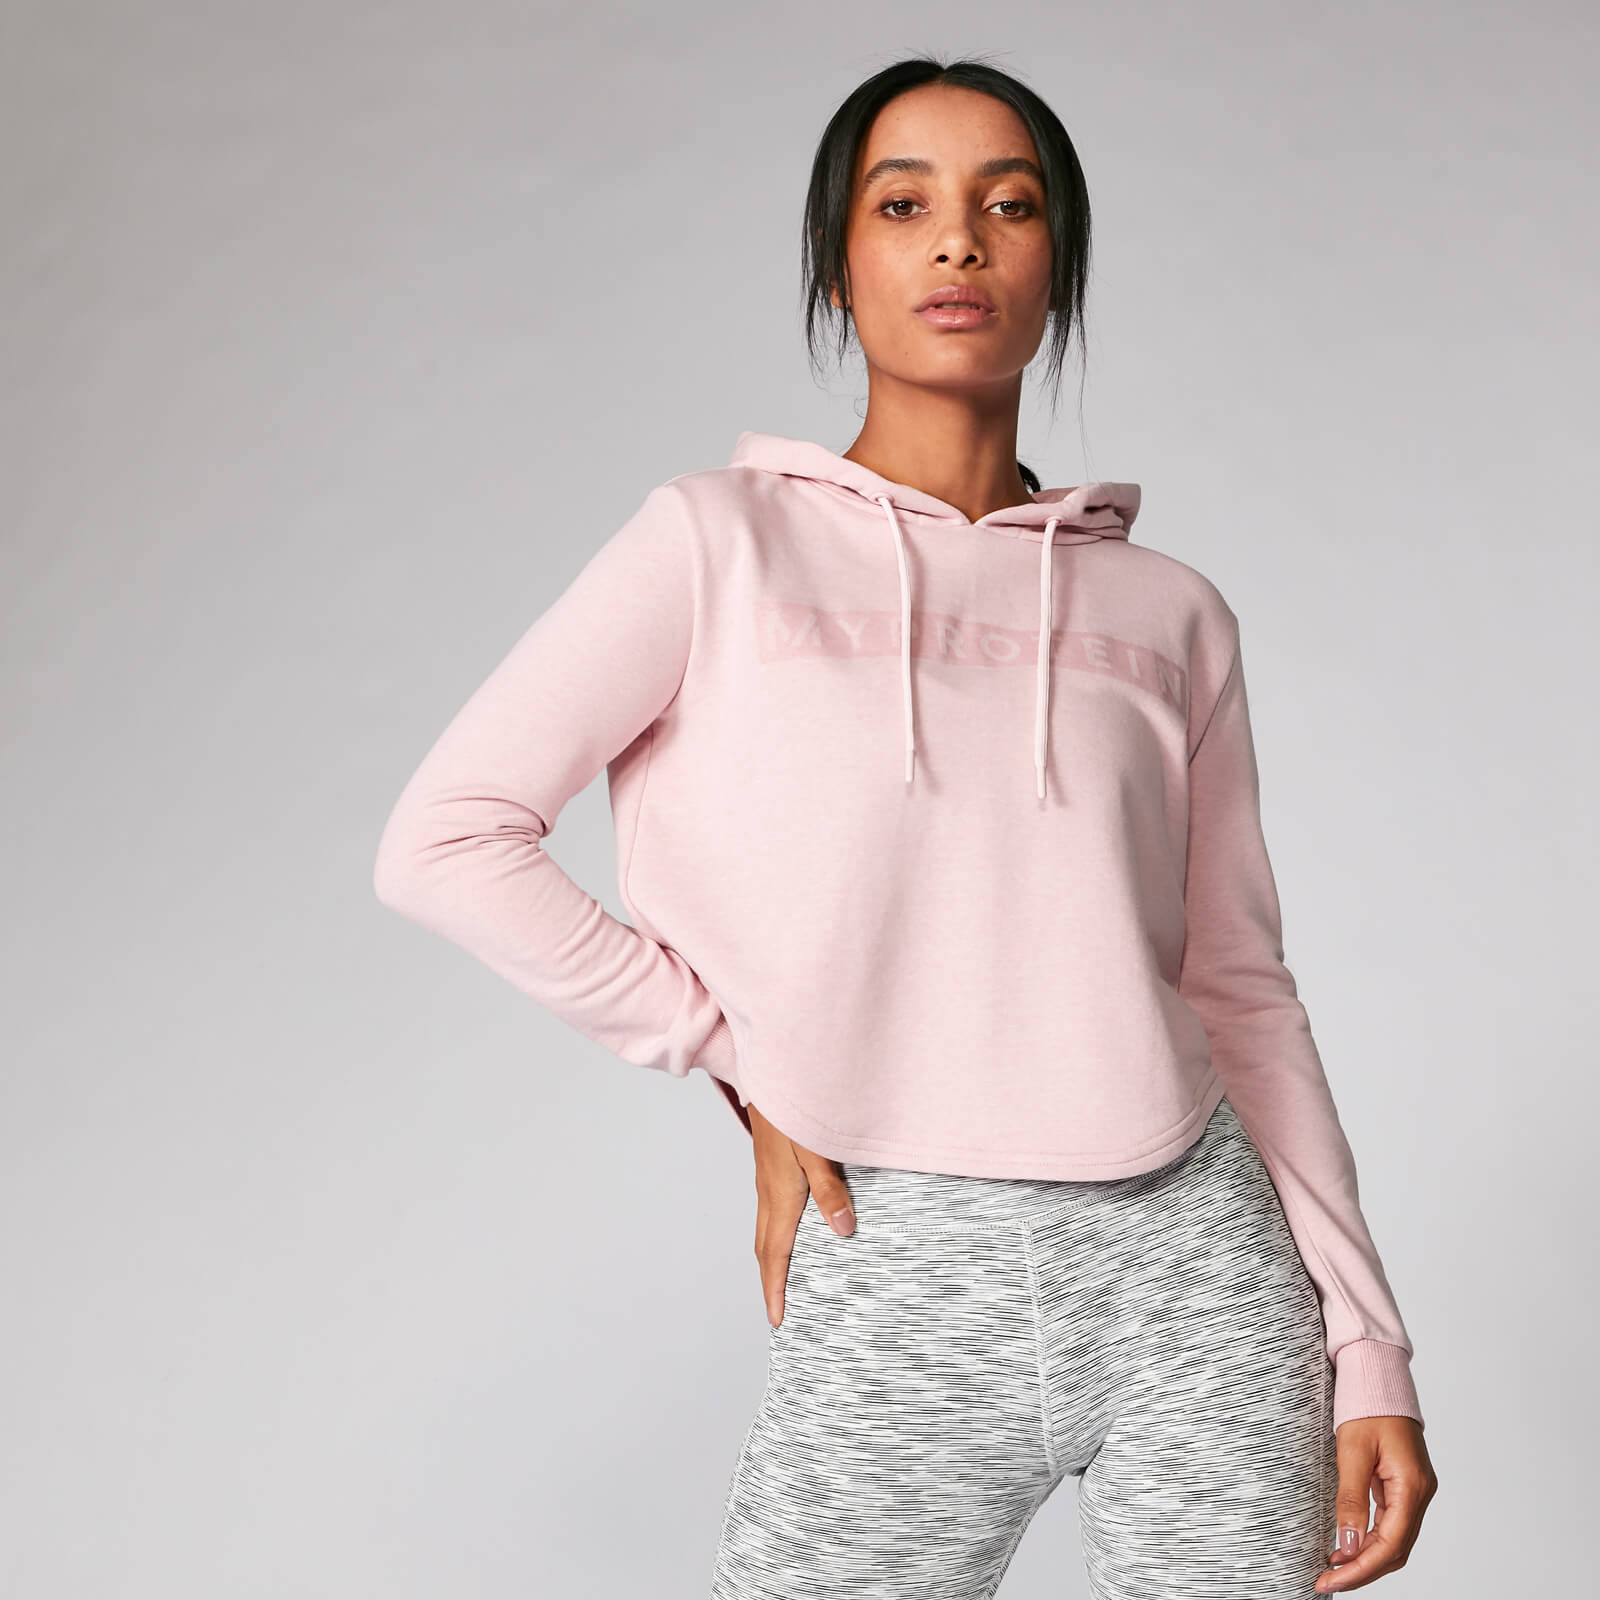 The Original Cropped Hoodie - Soft Pink - XS